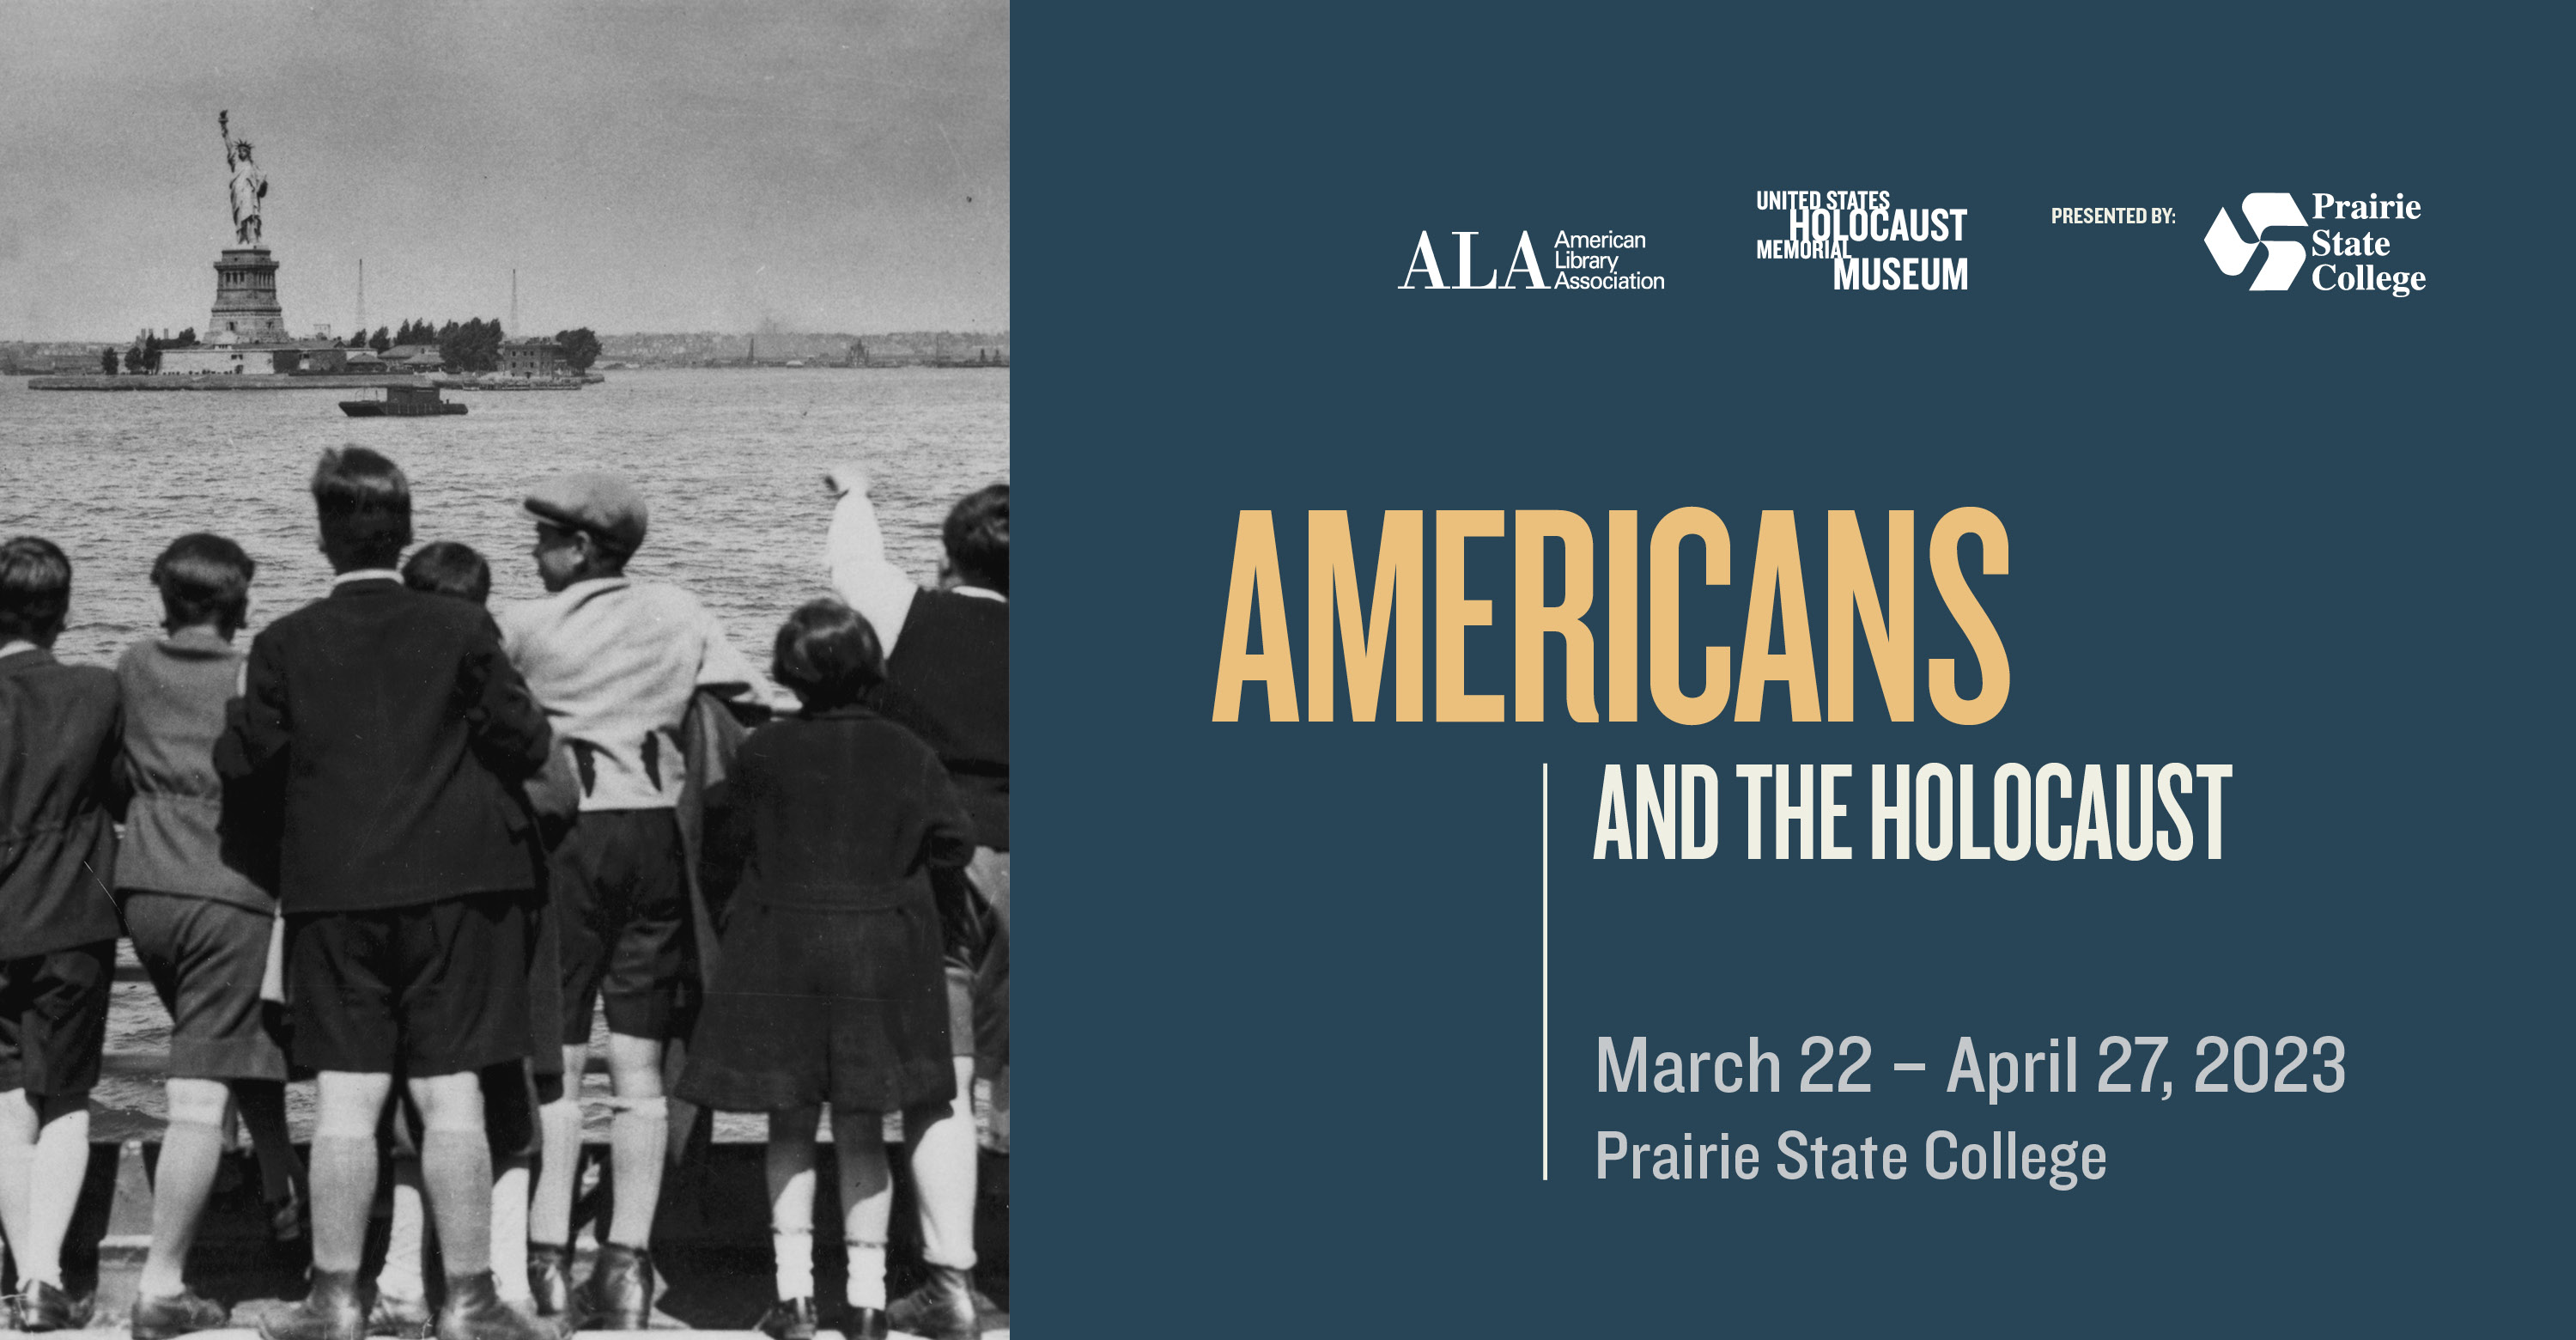 Americans and the Holocaust exhibit will be presented at Prairie State College from March 22nd until April 27th.